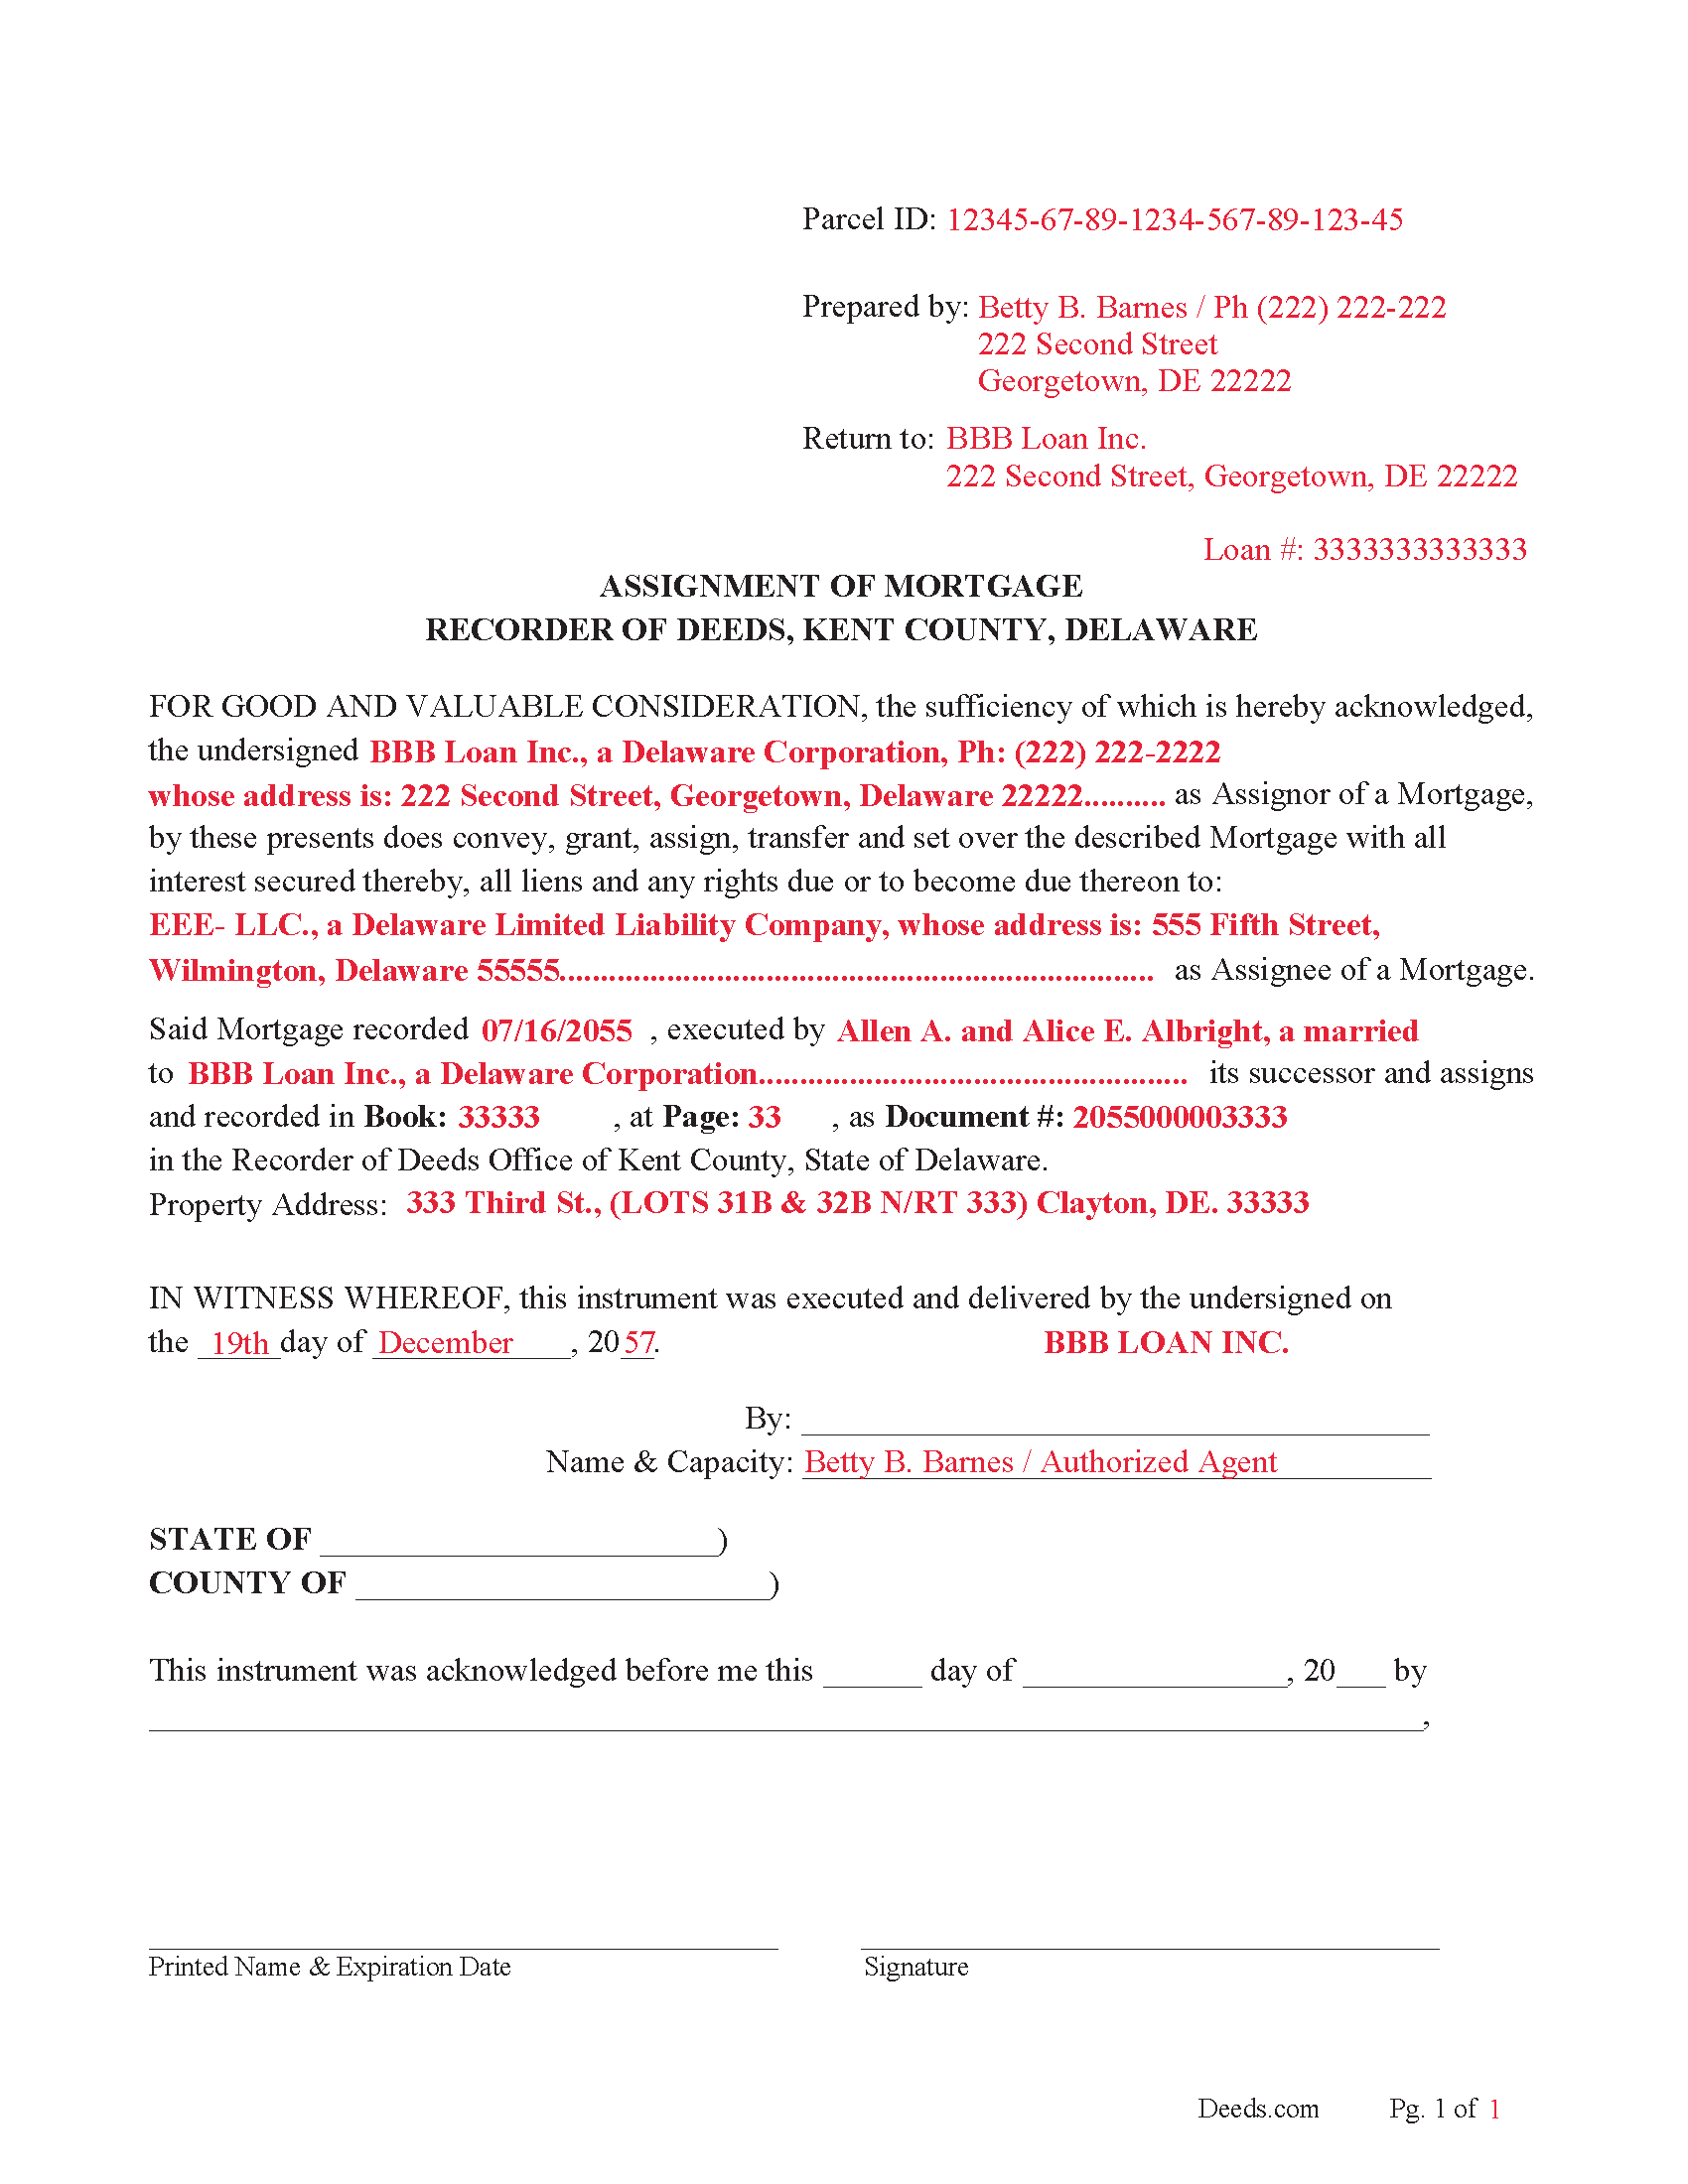 Completed Example of the Assignment of Mortgage Document